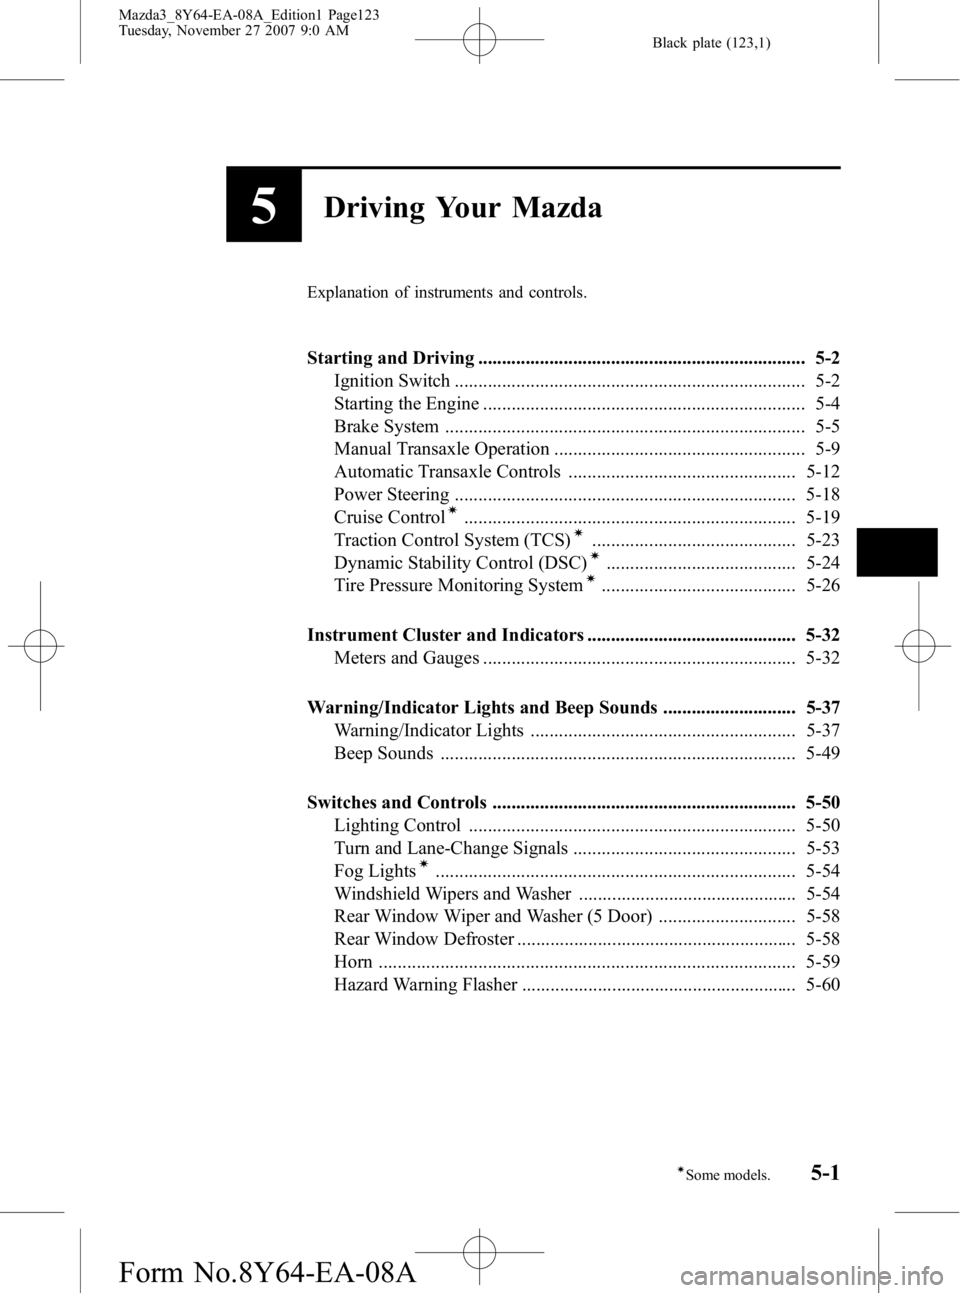 MAZDA MODEL 3 5-DOOR 2008  Owners Manual Black plate (123,1)
5Driving Your Mazda
Explanation of instruments and controls.
Starting and Driving ..................................................................... 5-2Ignition Switch .........